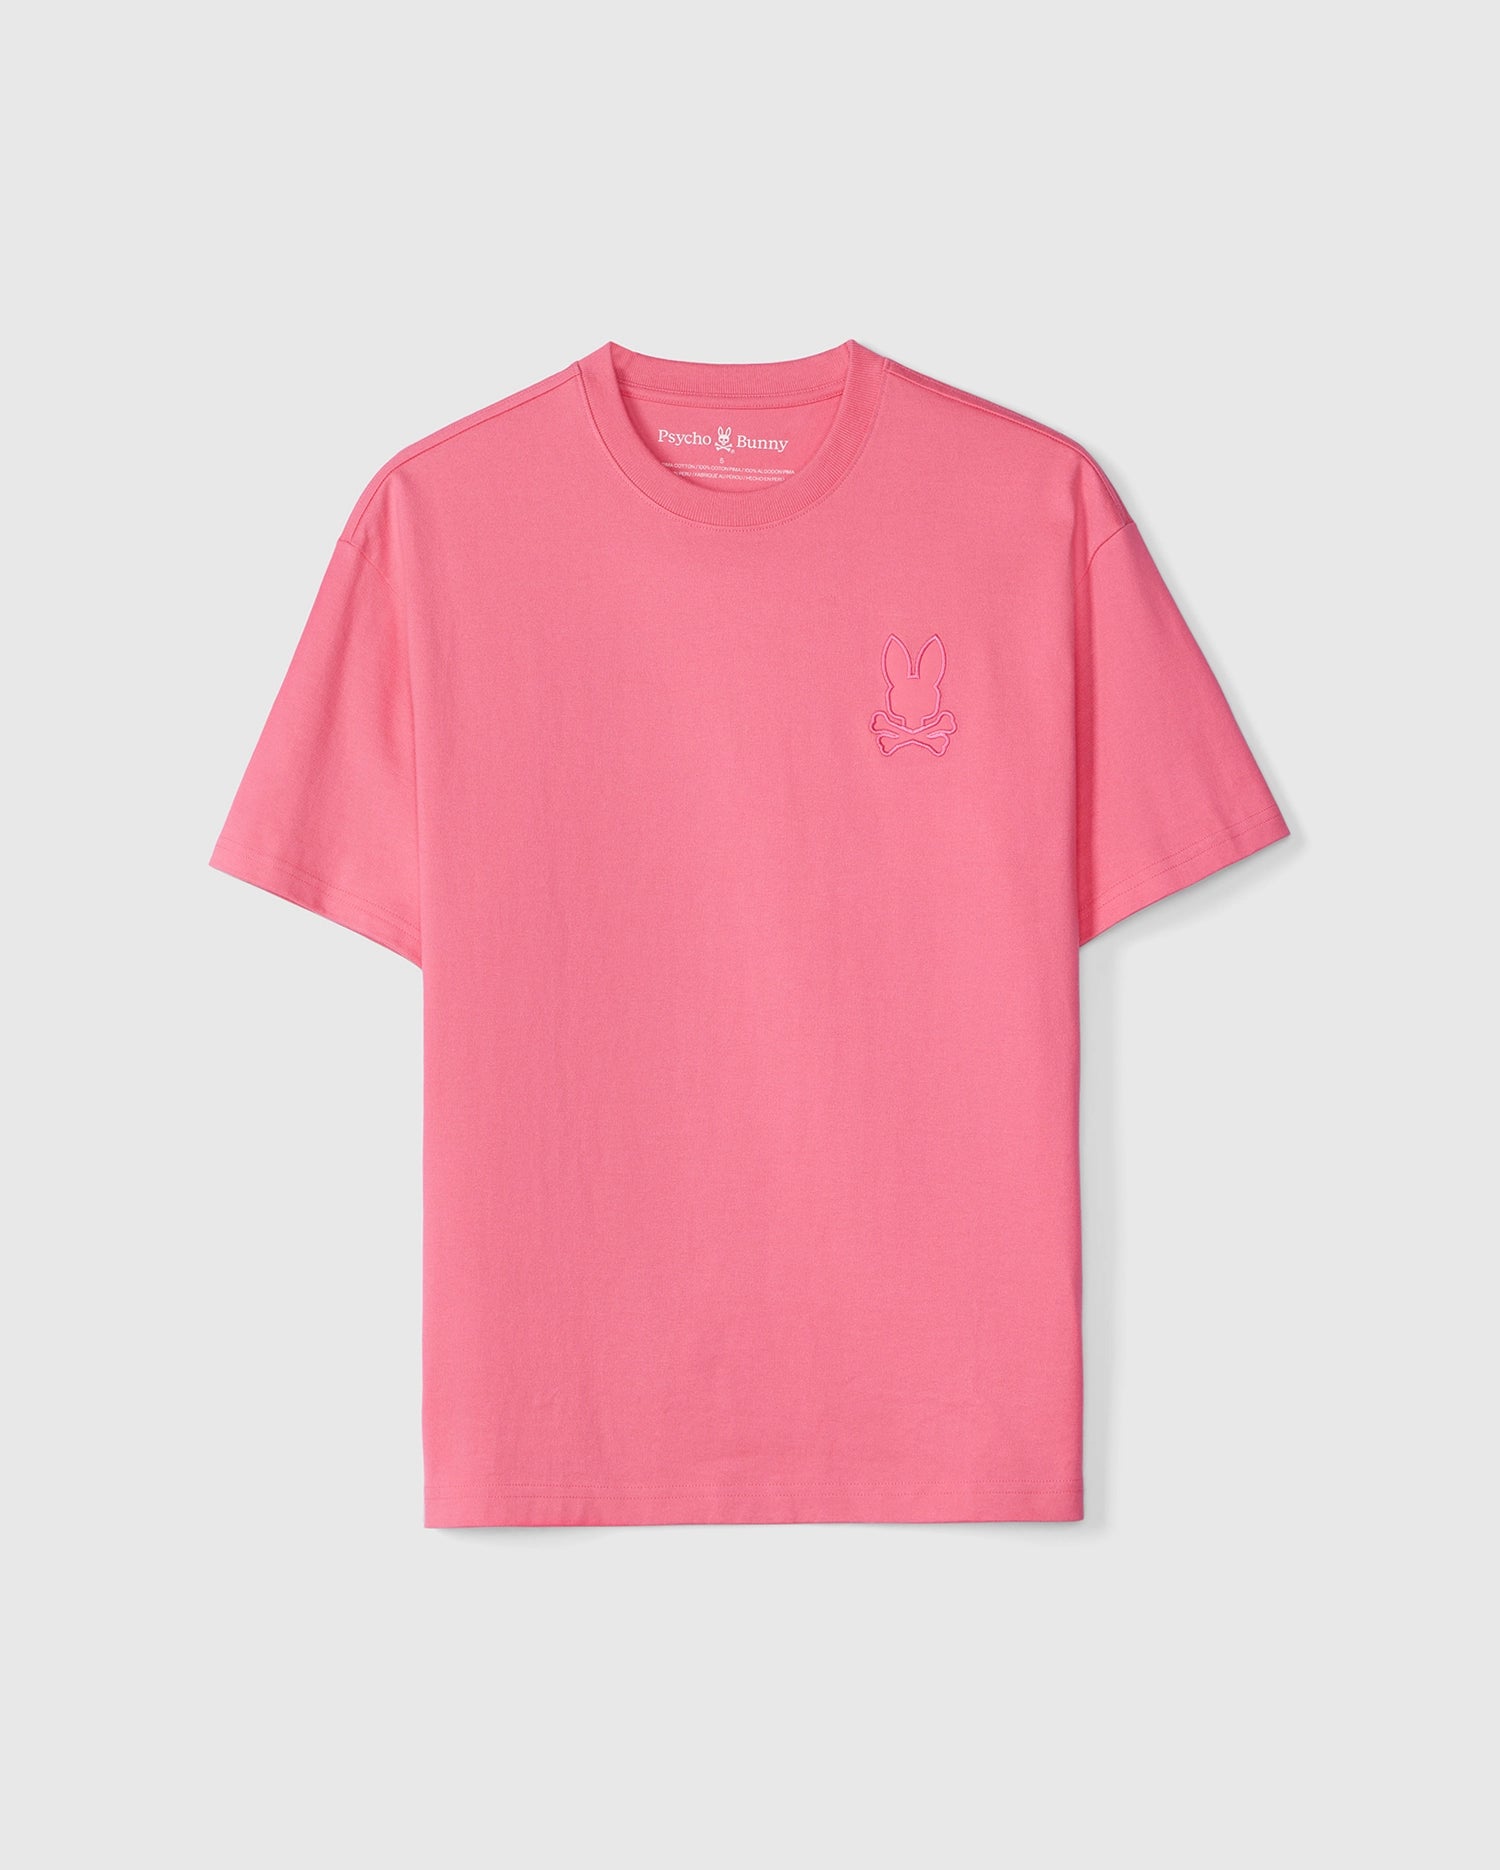 A plain pink MENS DANBY OVERSIZED TEE - B6U359B2TS with a small, purple bunny embroidered appliqué on the left chest area, displayed against a white background by Psycho Bunny.